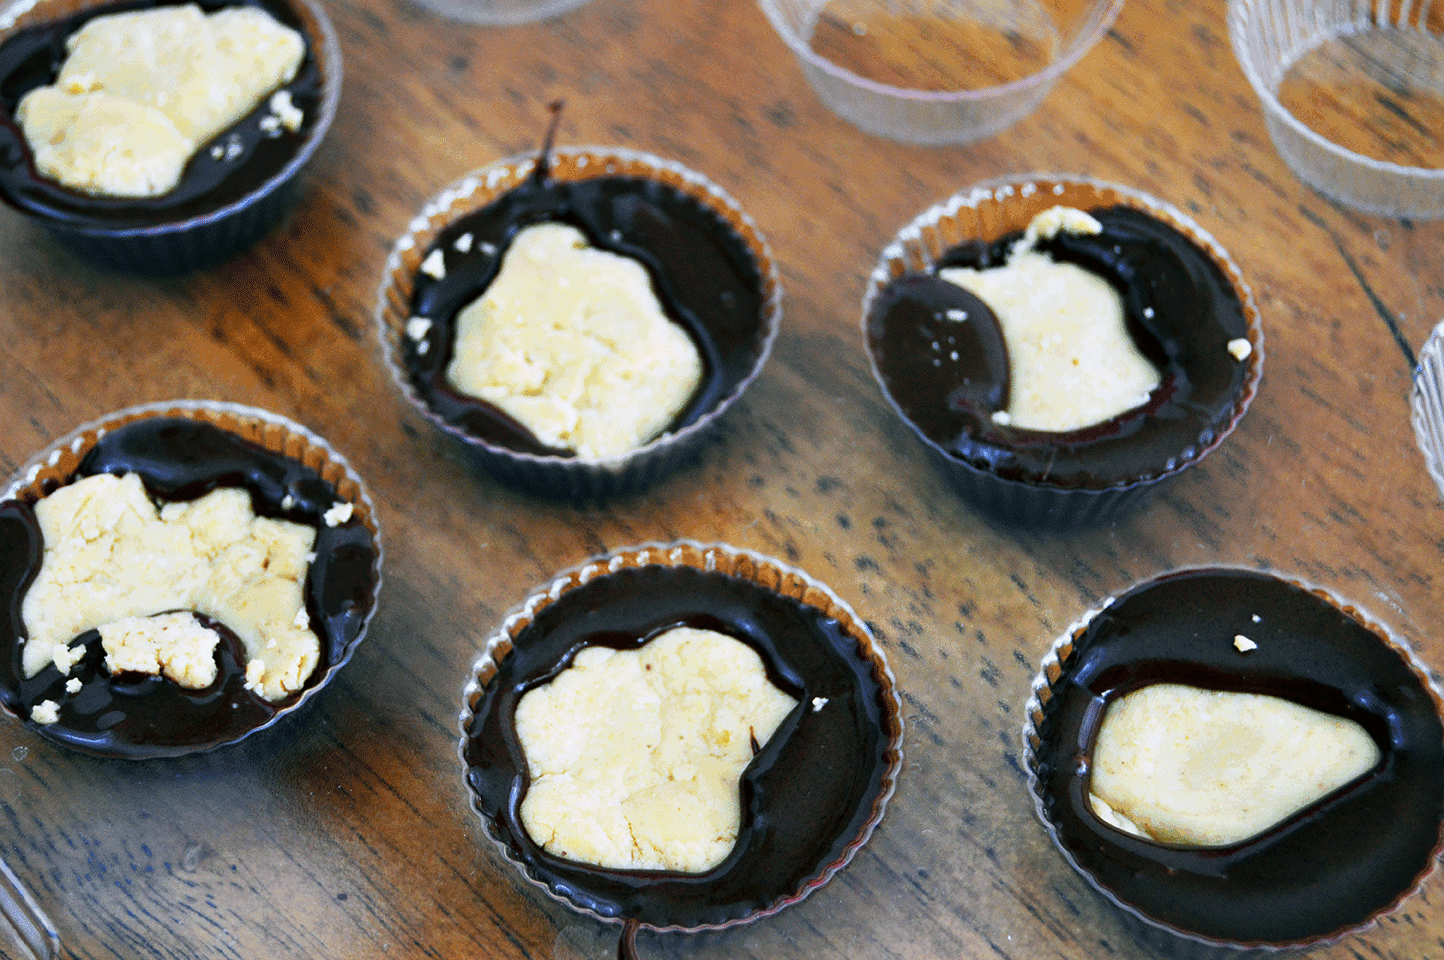 filled peanut butter cup molds